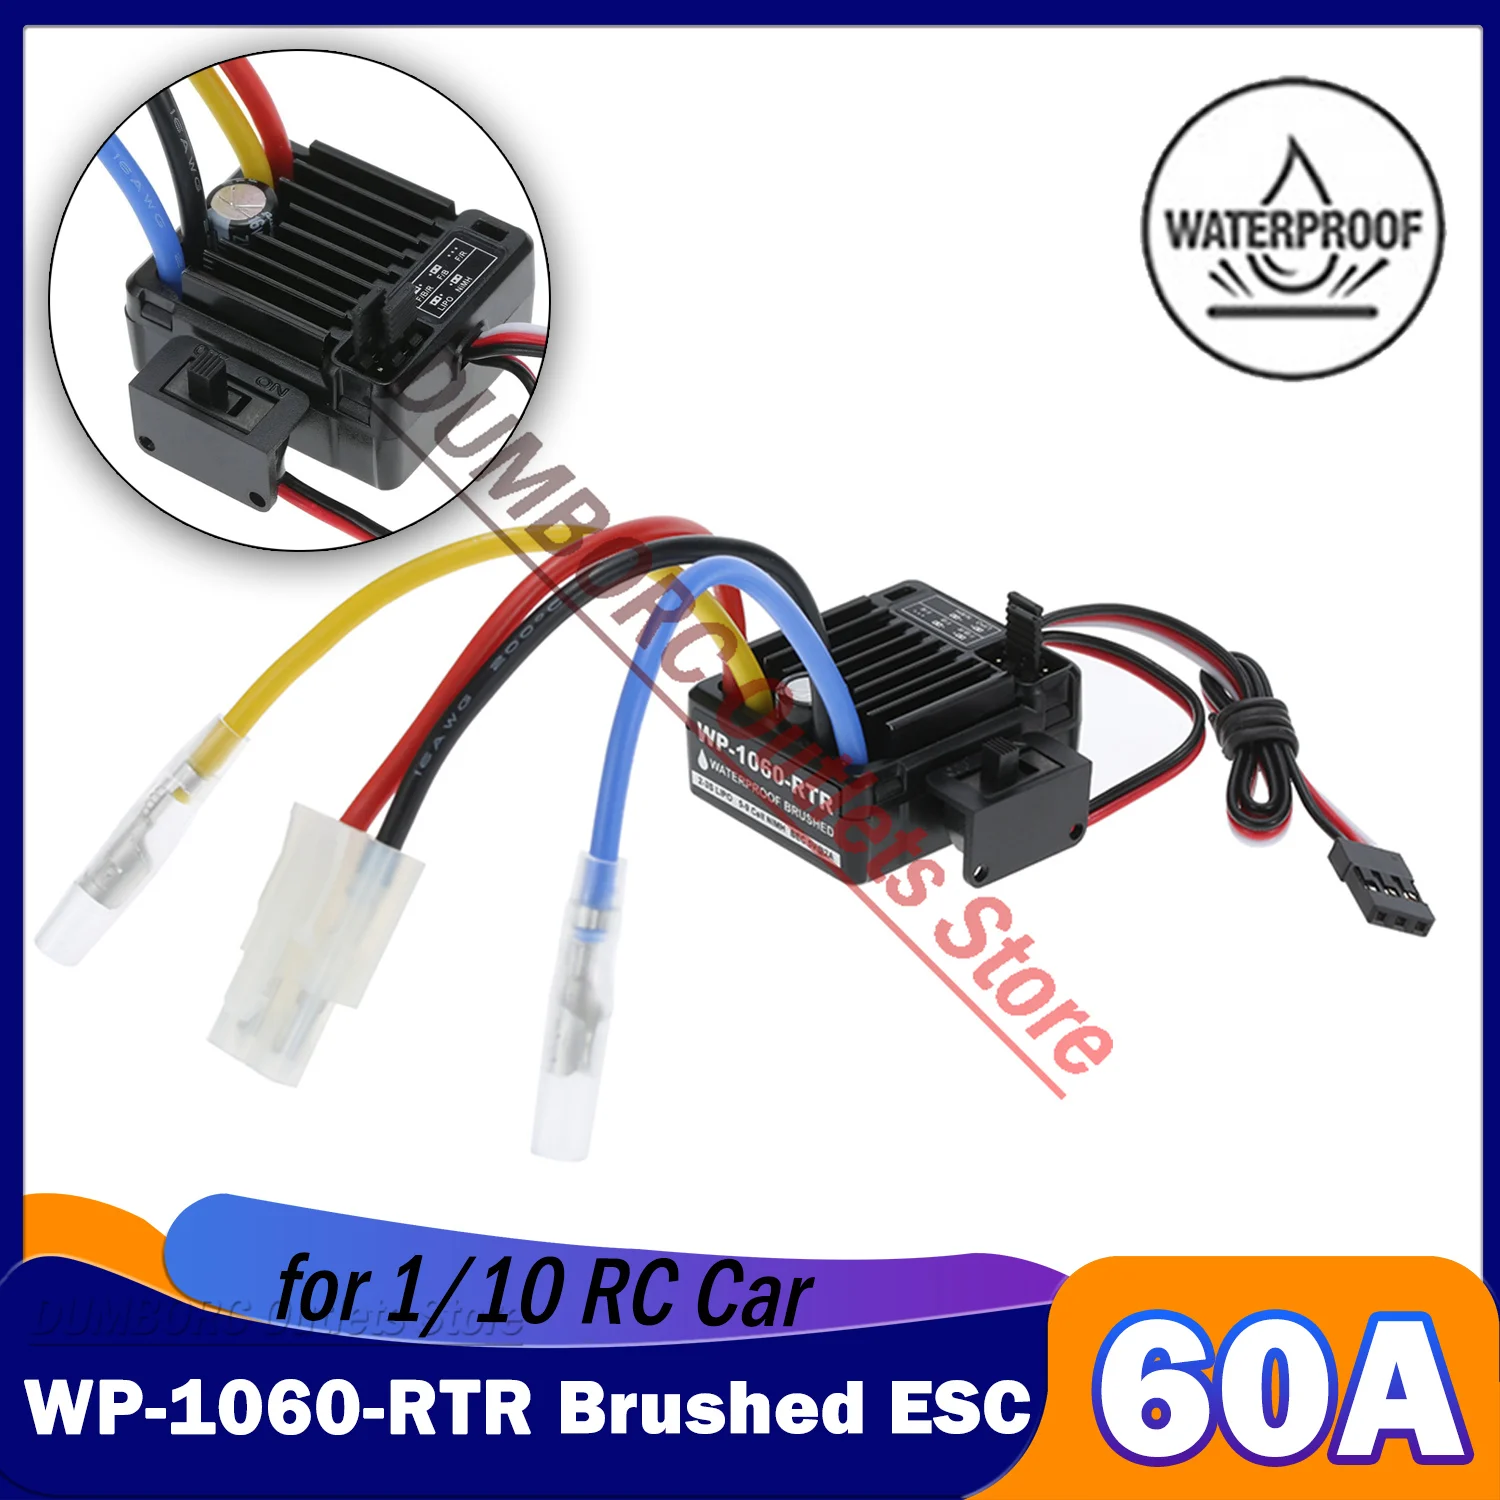 

Waterproof 60A Brushed ESC WP-1060-RTR 2-3S BEC 5V/2A Electronic Speed Controller for 1/10 RC Car Tamiya Traxxas Redcat HPI D90